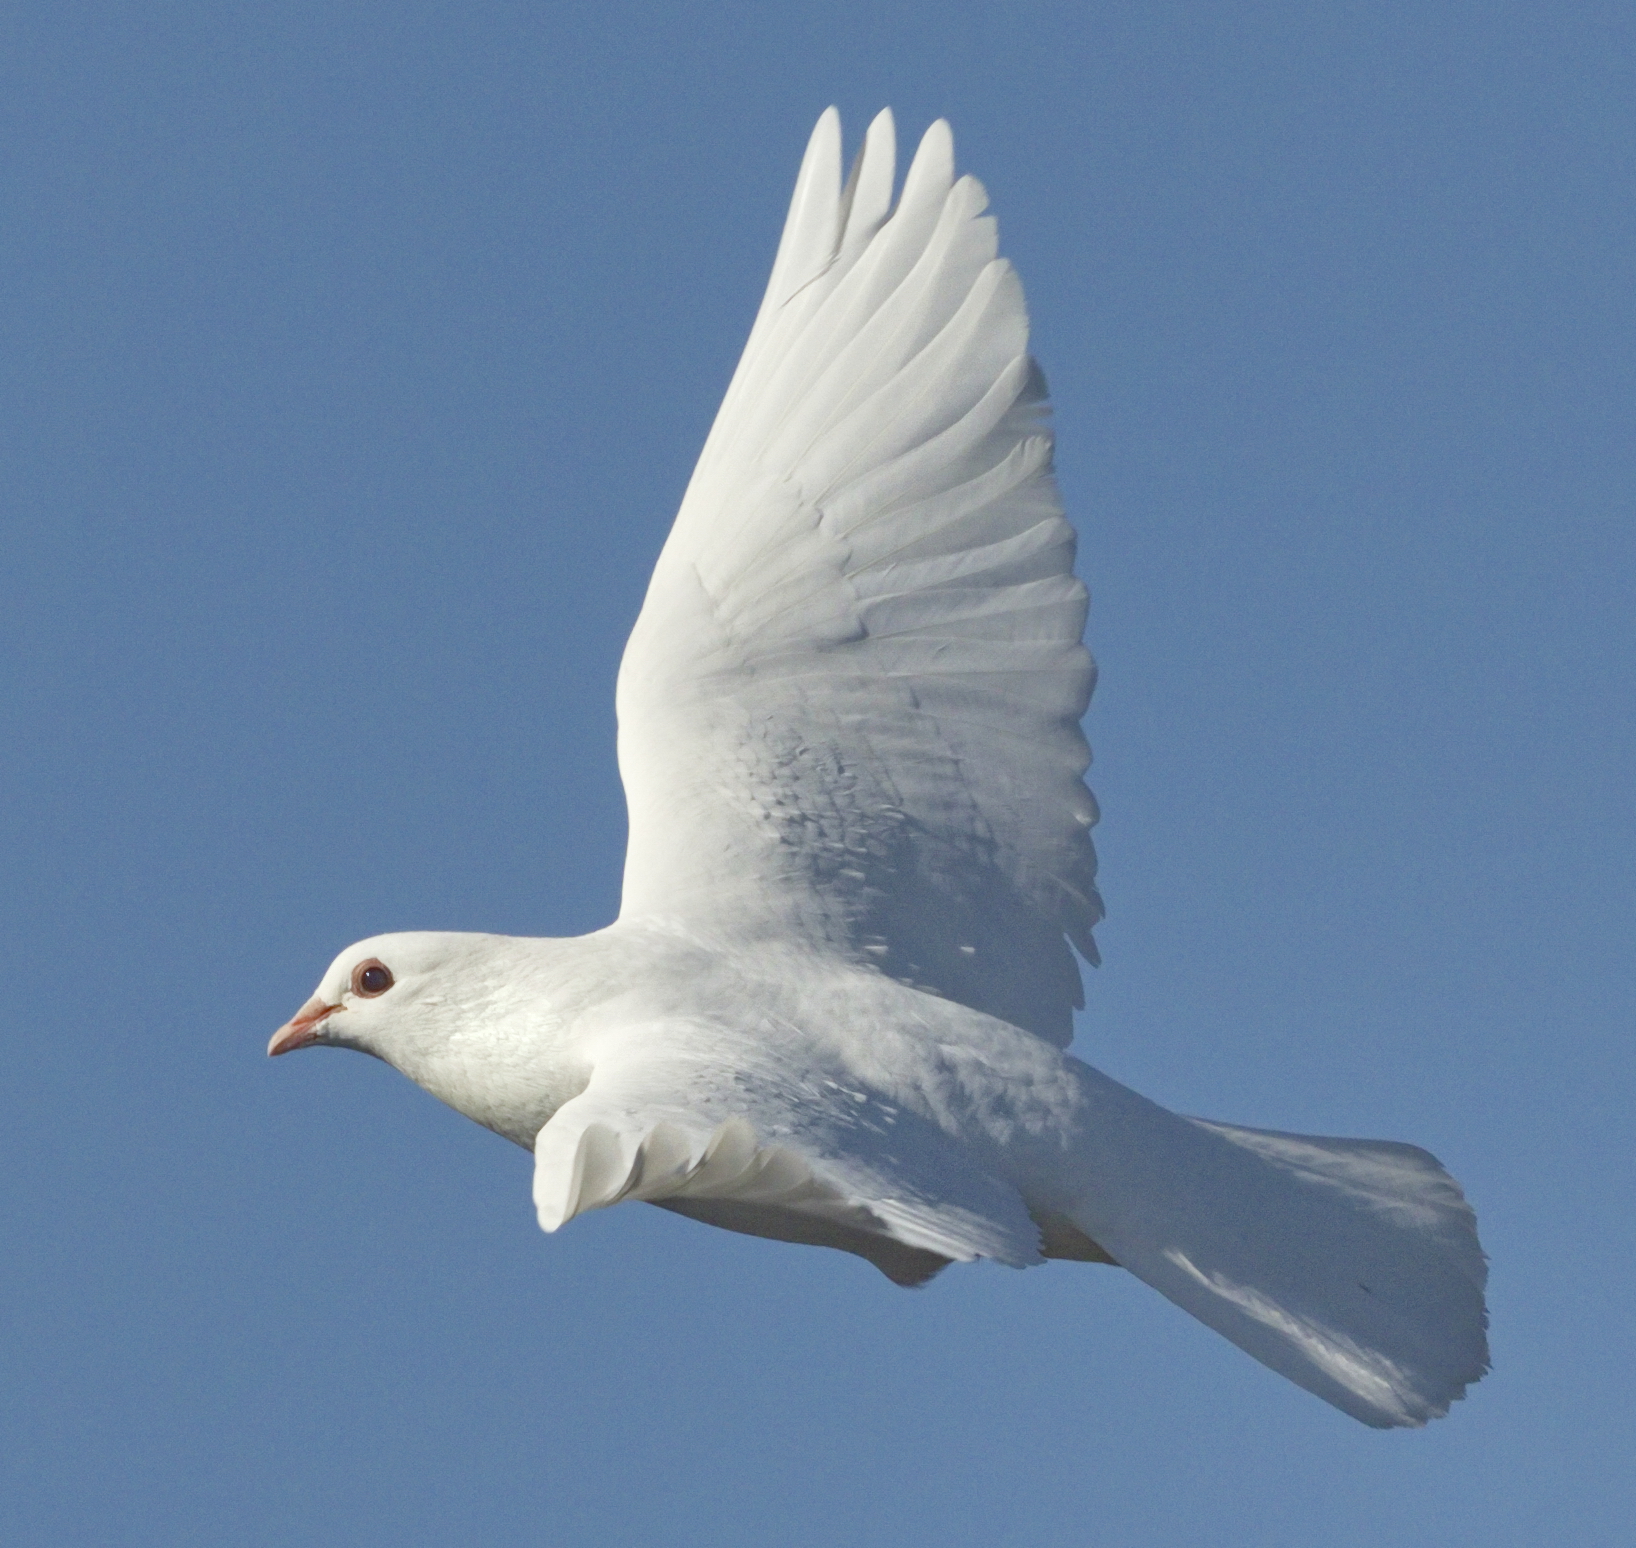 visit from white dove